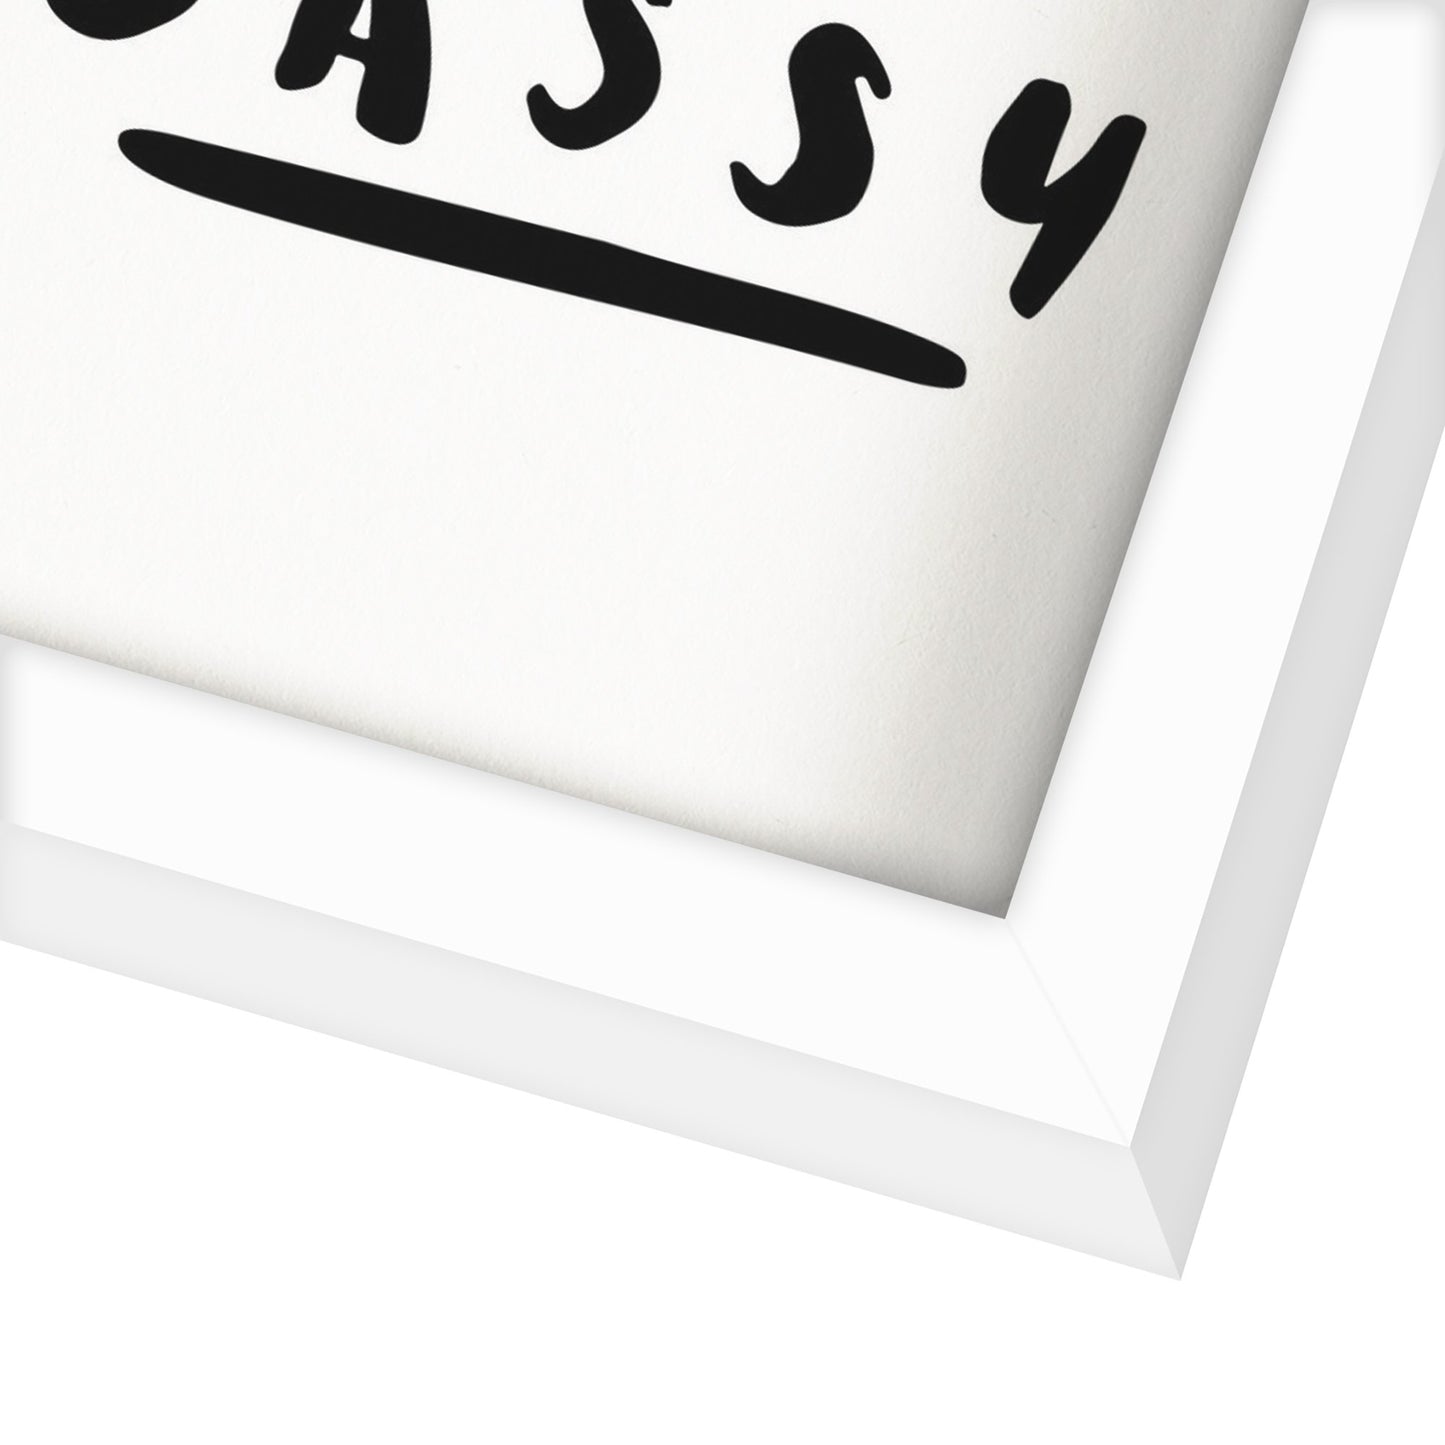 Born Sassy By Motivated Type - Shadow Box Framed Art - Americanflat